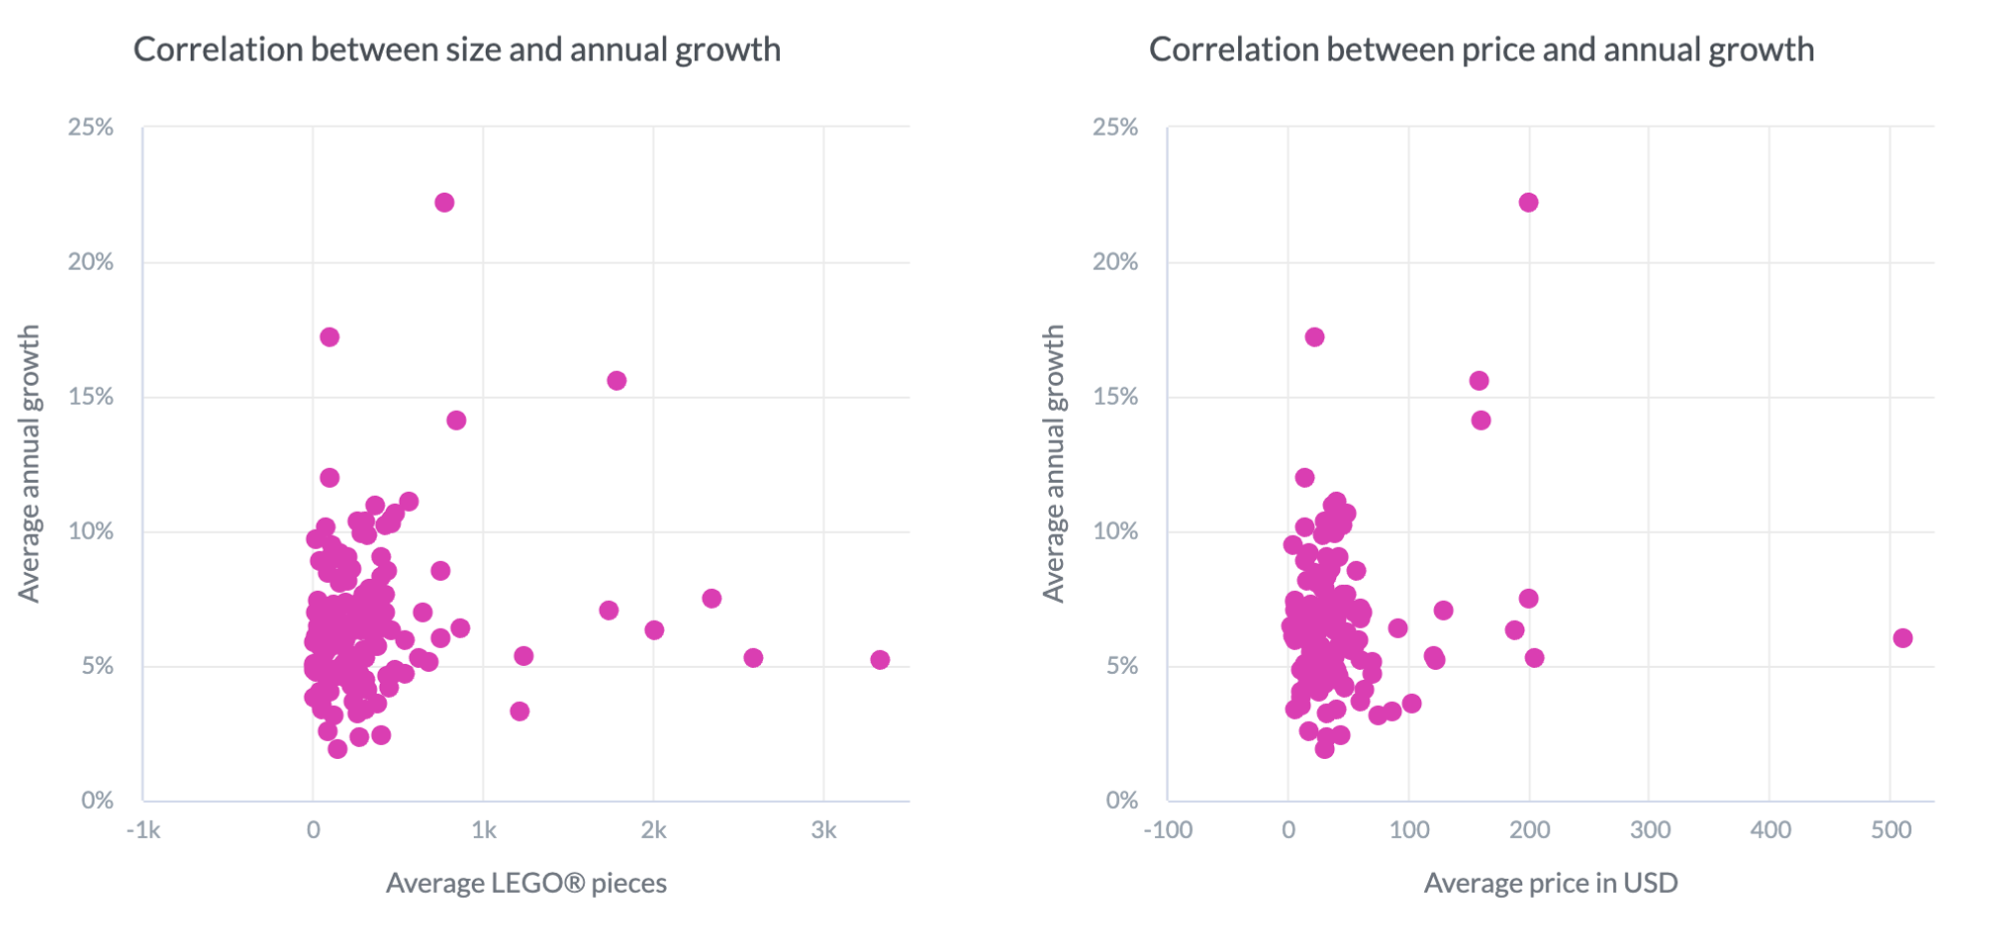 Correlation between annual growth and size/price.